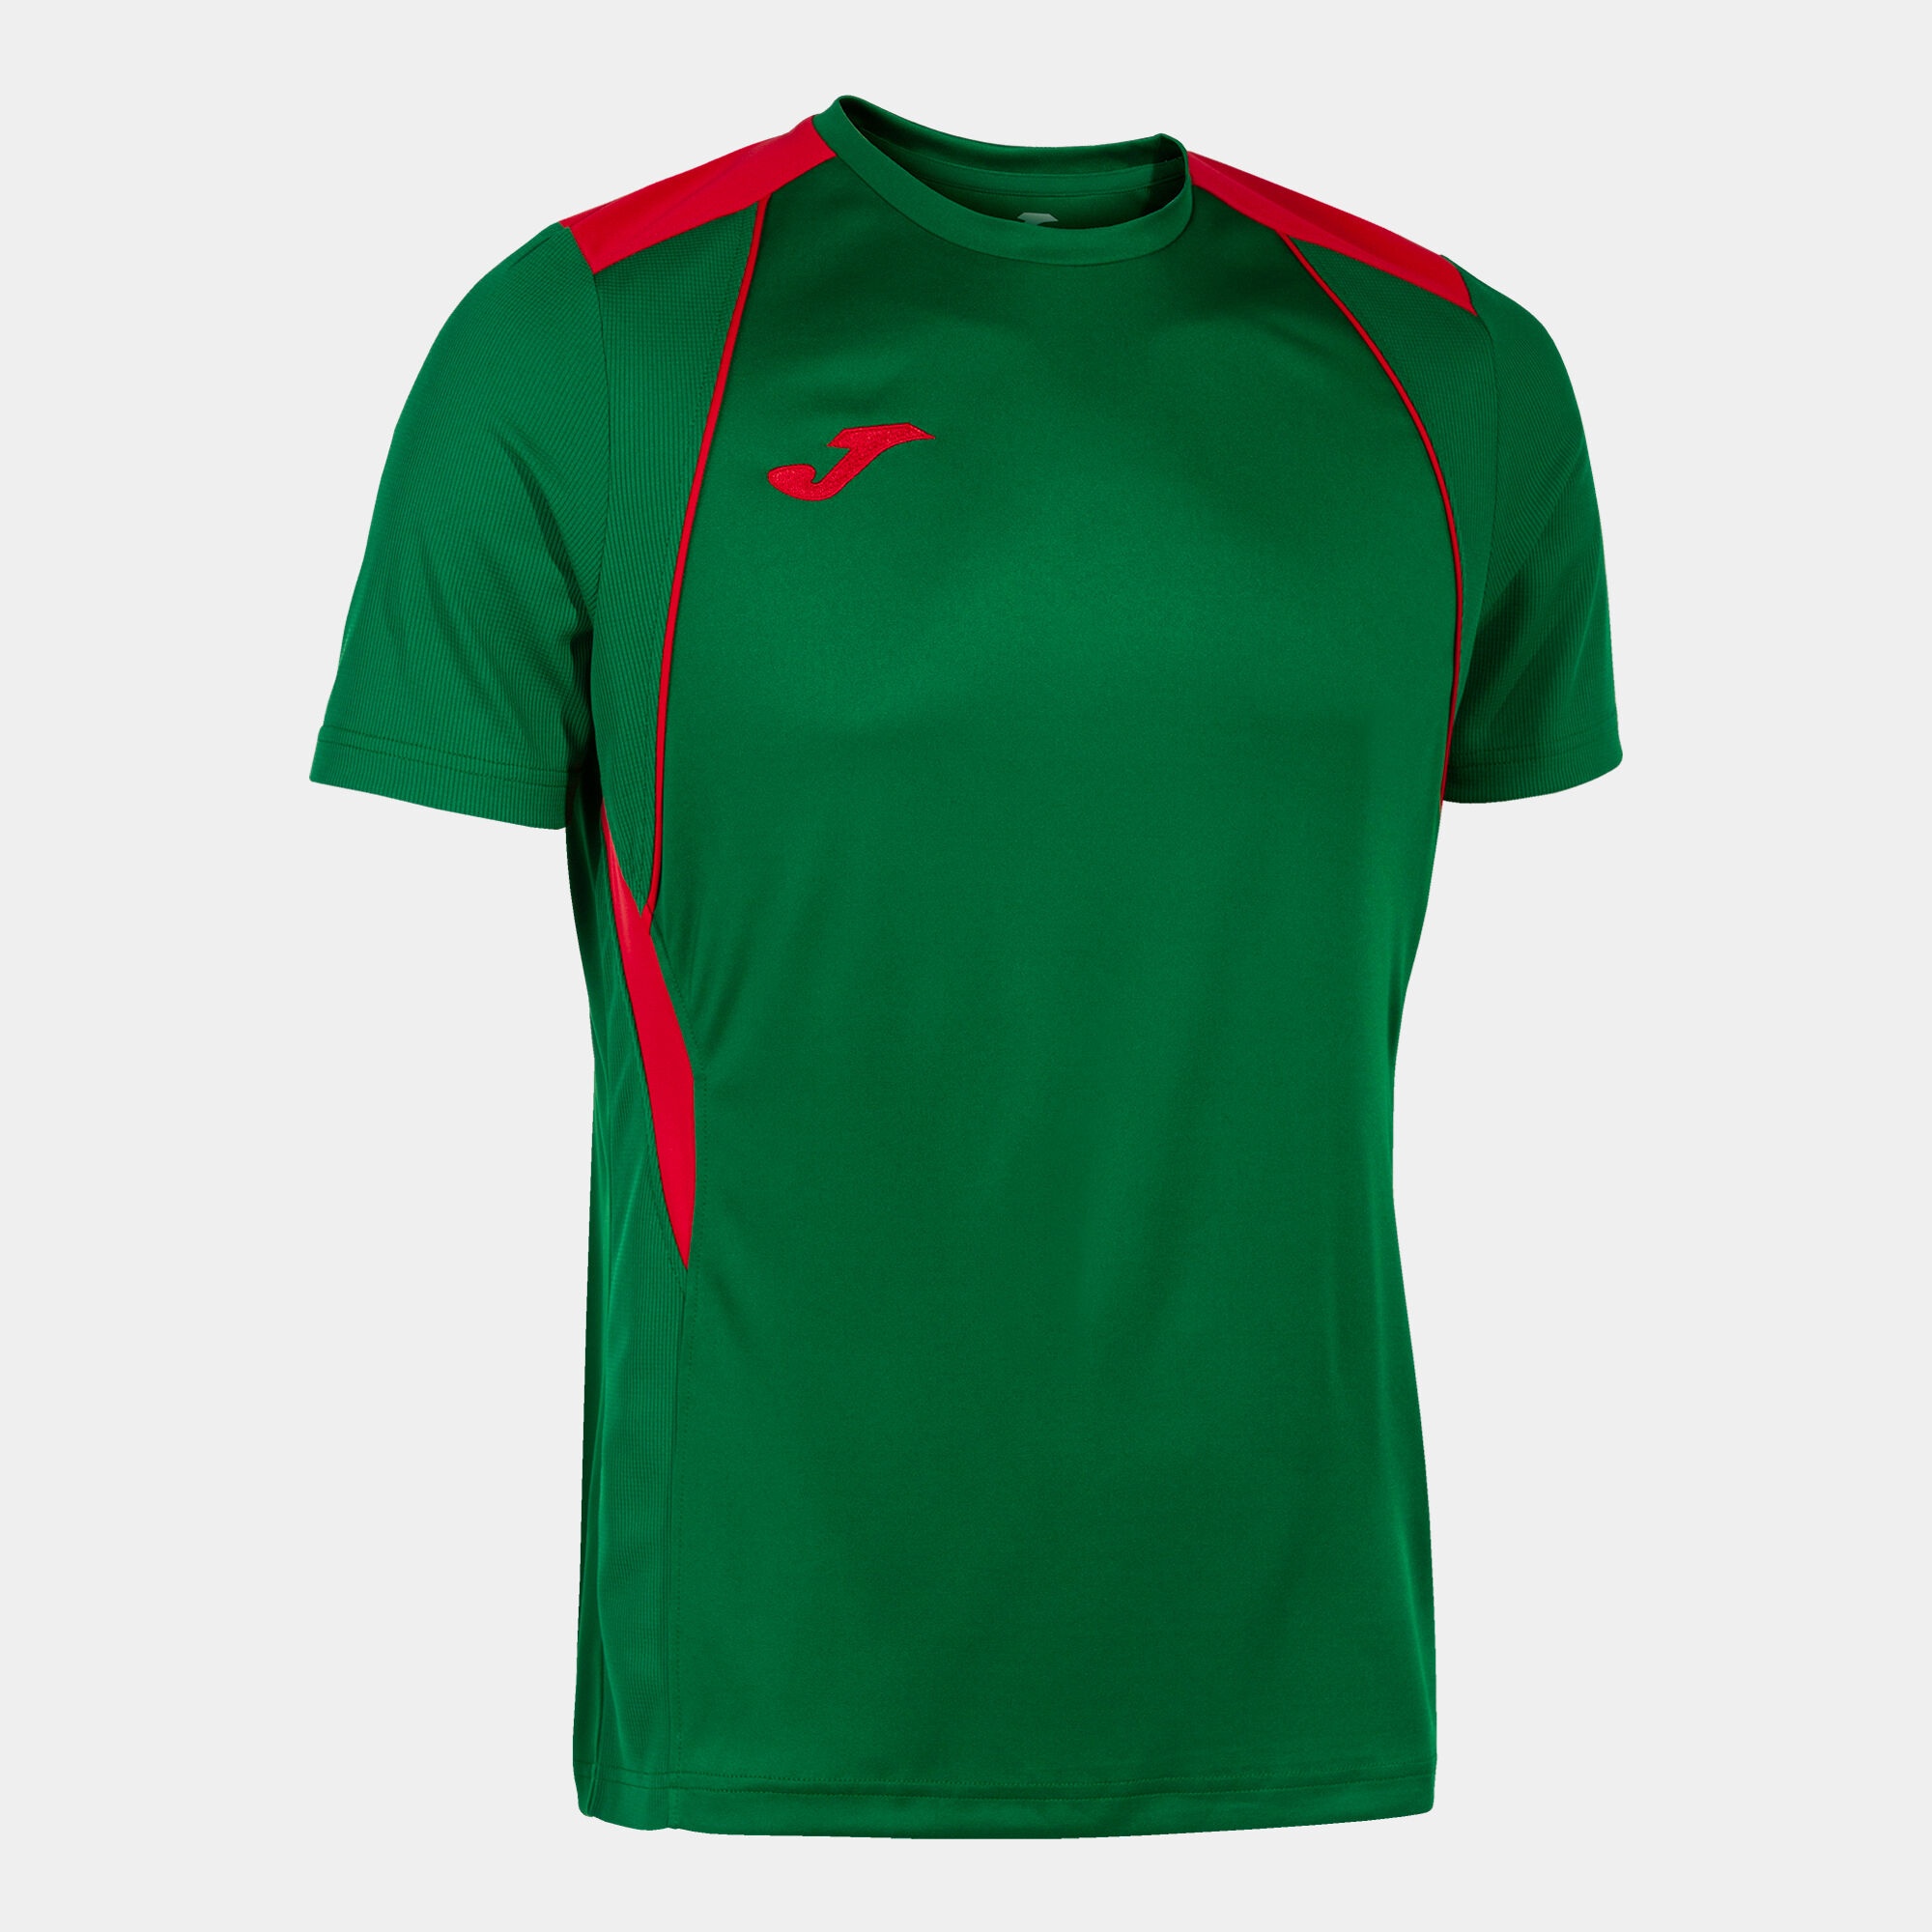 Maillot manches courtes homme Championship VII vert rouge